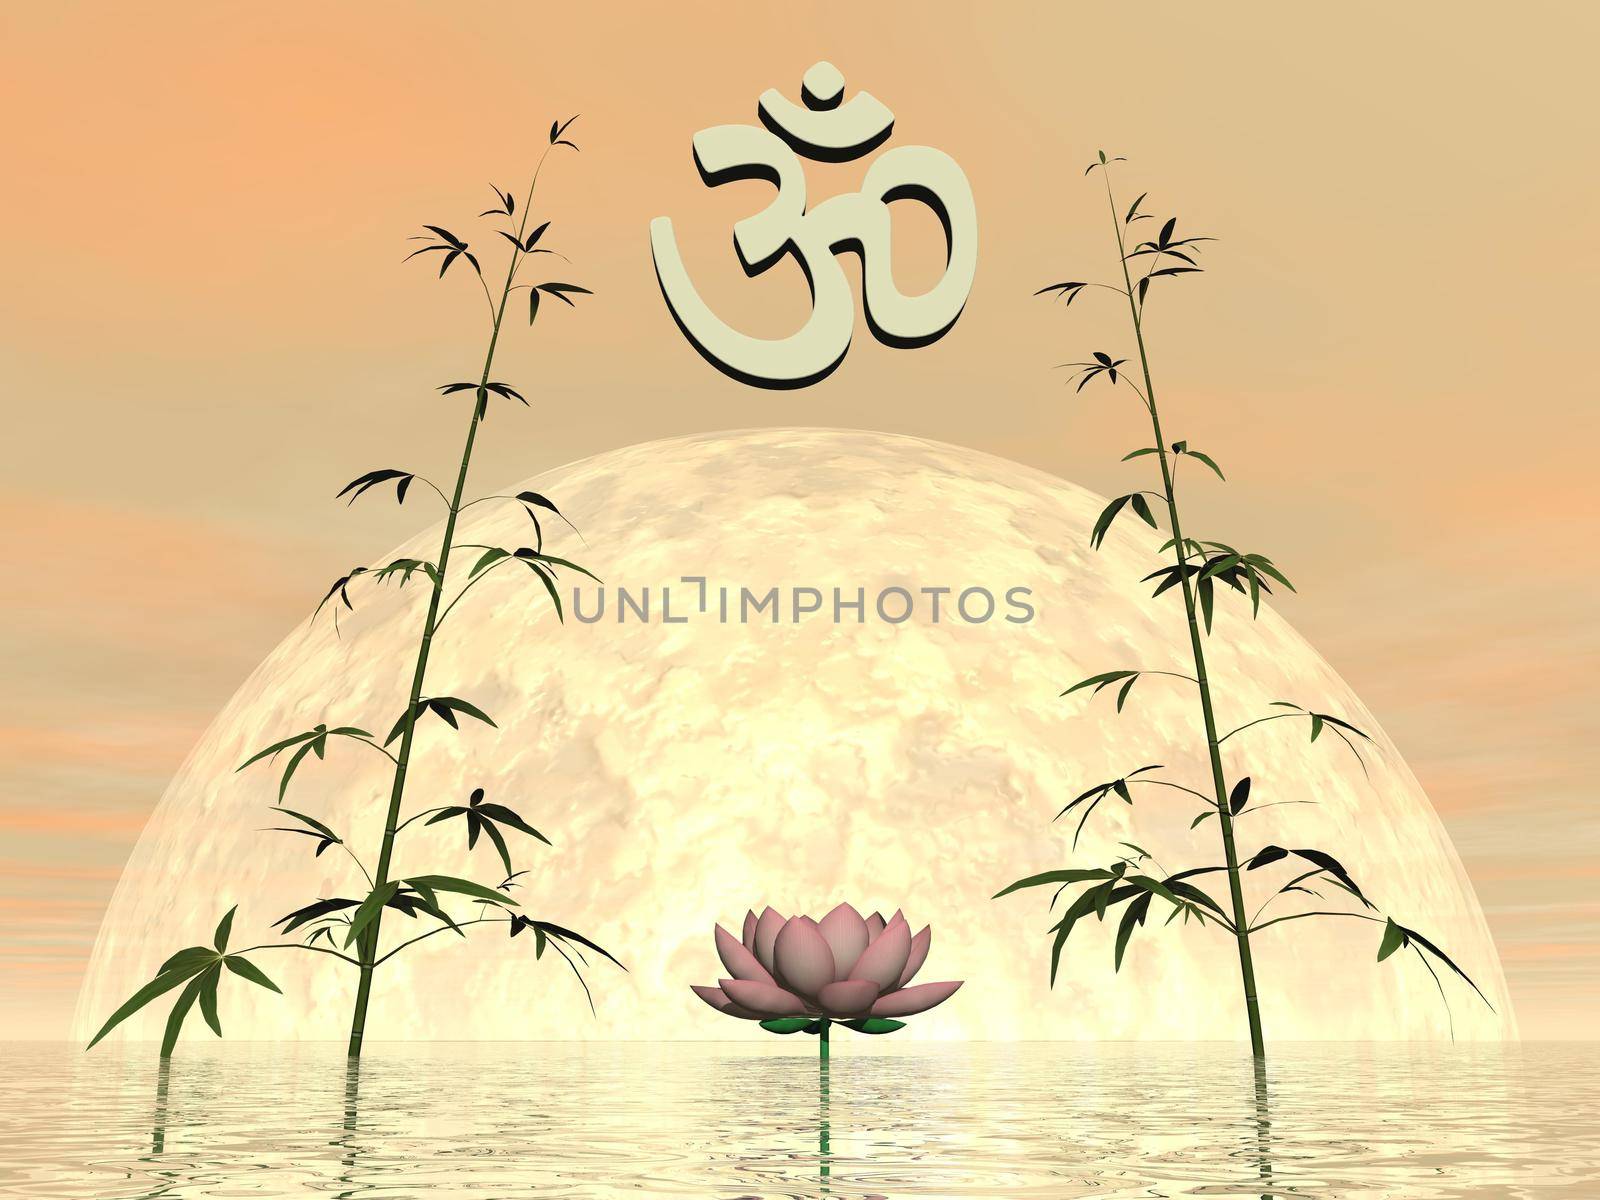 Aum upon one lily flower and between bamboos in front of moon